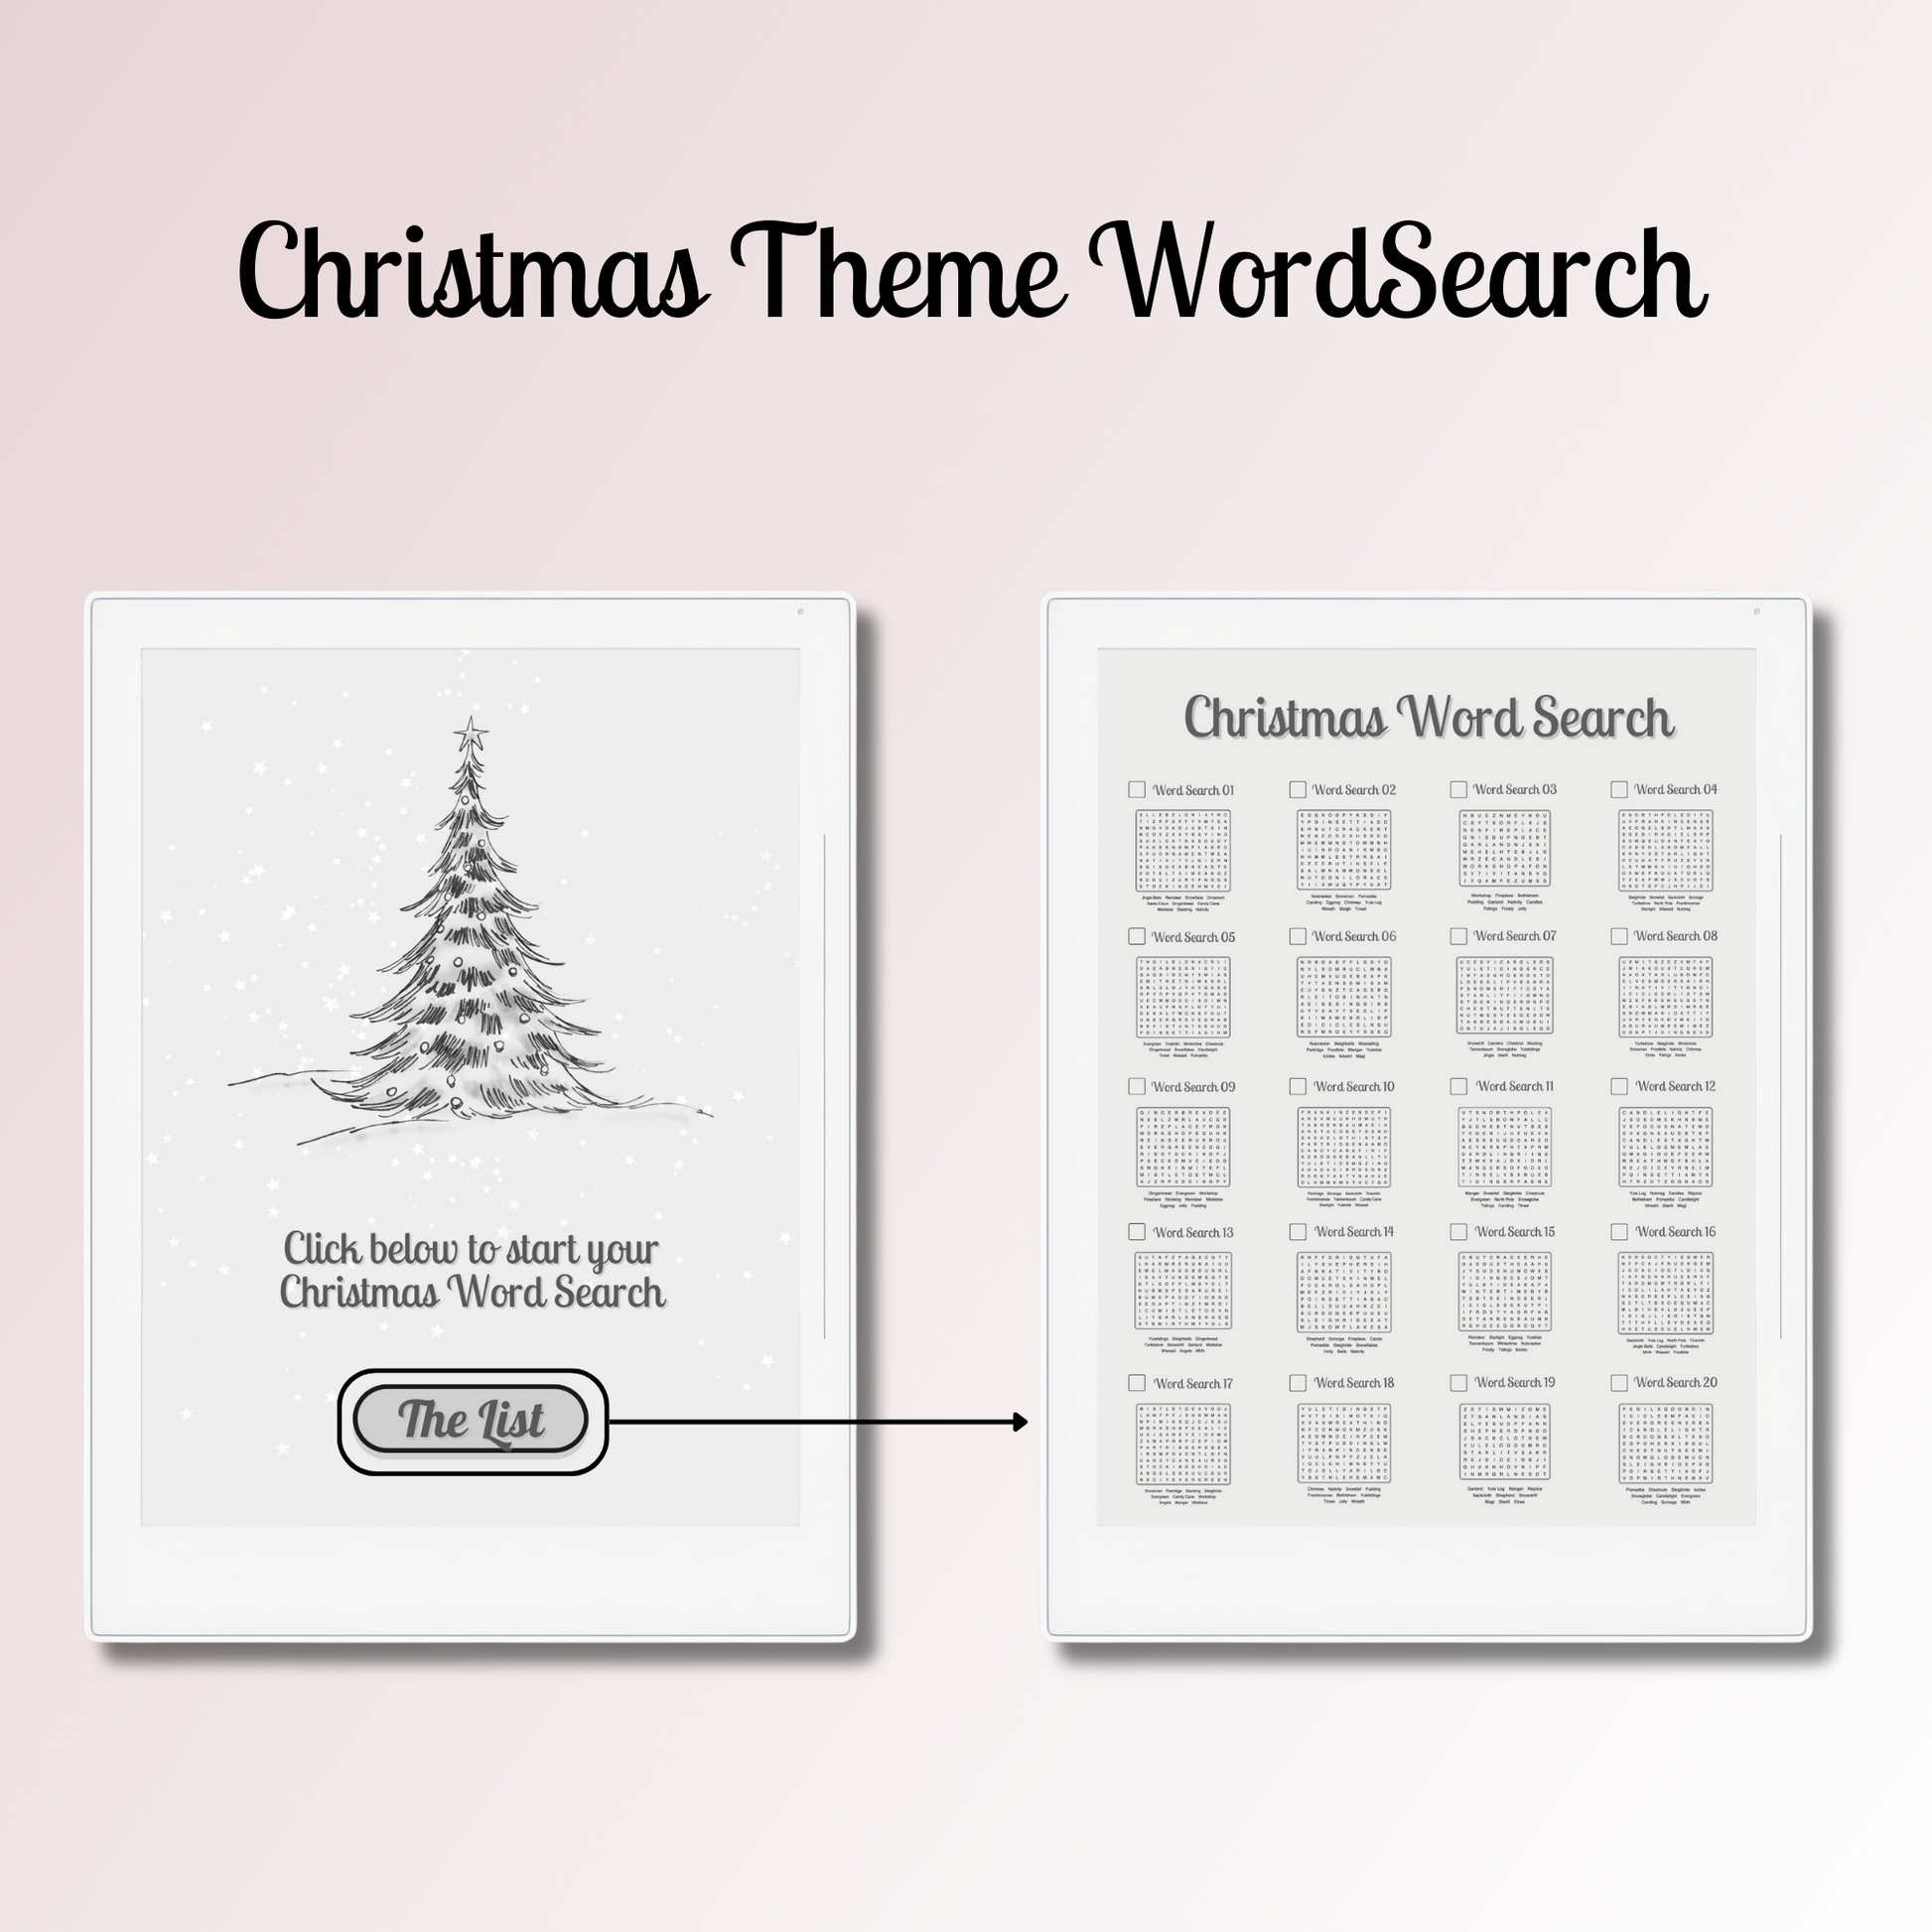 Supernote A5X and A6X Christmas Word Search with easy navigations.